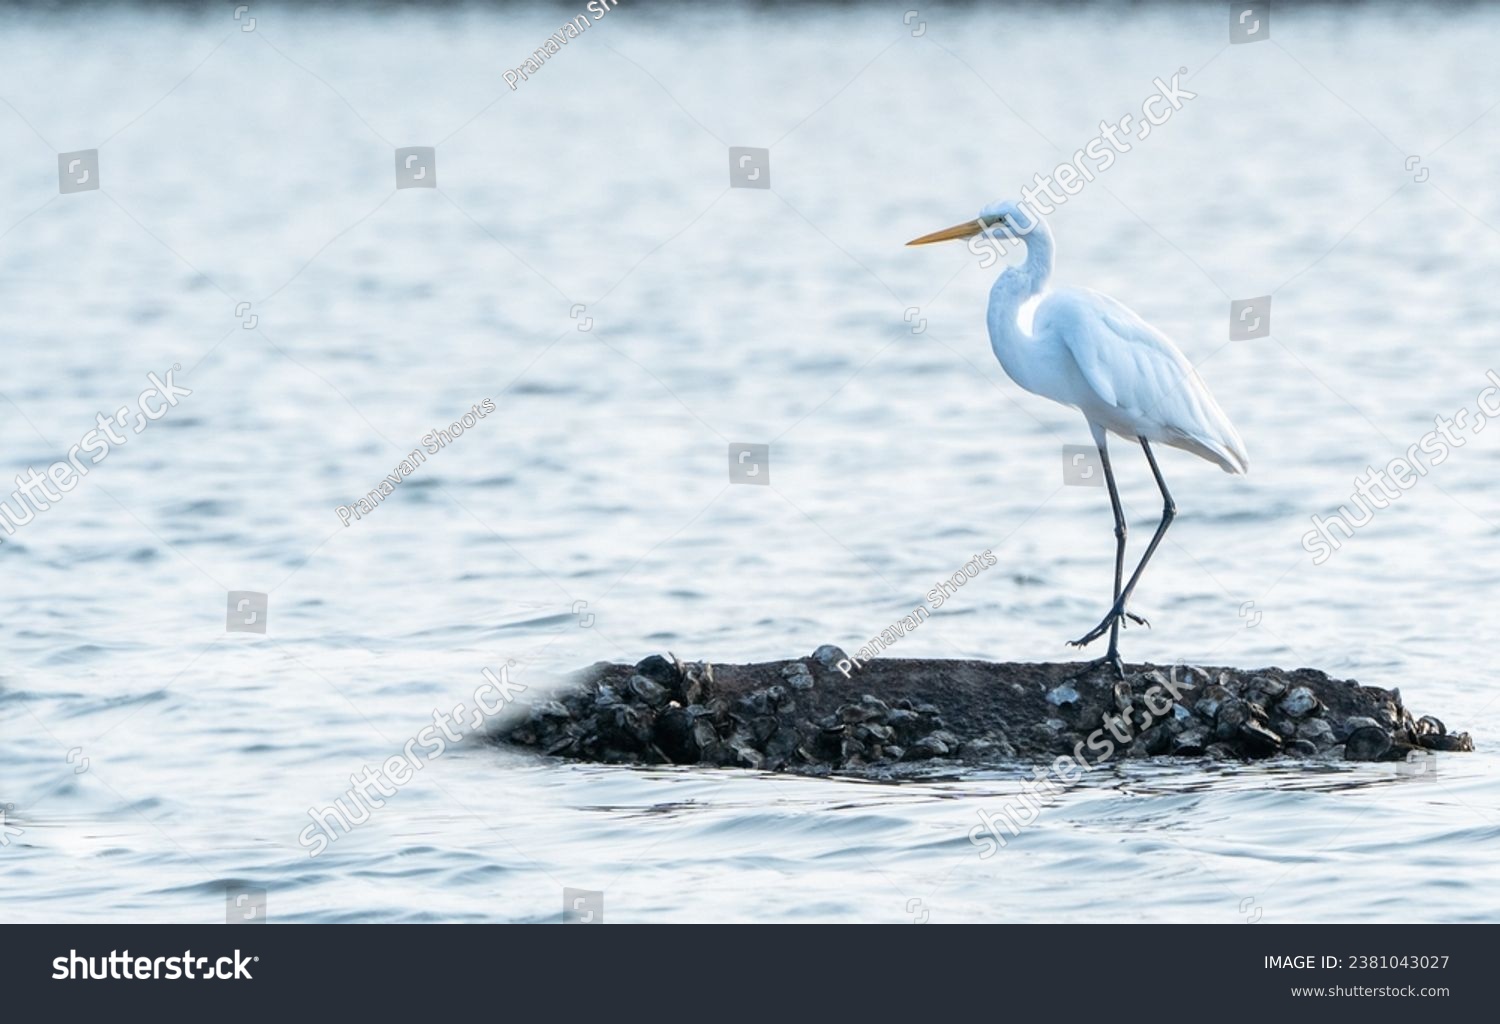 beautiful photograph of great white egret isolated standing mangrove forest swamp backwaters salt lake calm lonely negative empty space sea water ripples india Arabian Sea sanctuary island yellow bill #2381043027